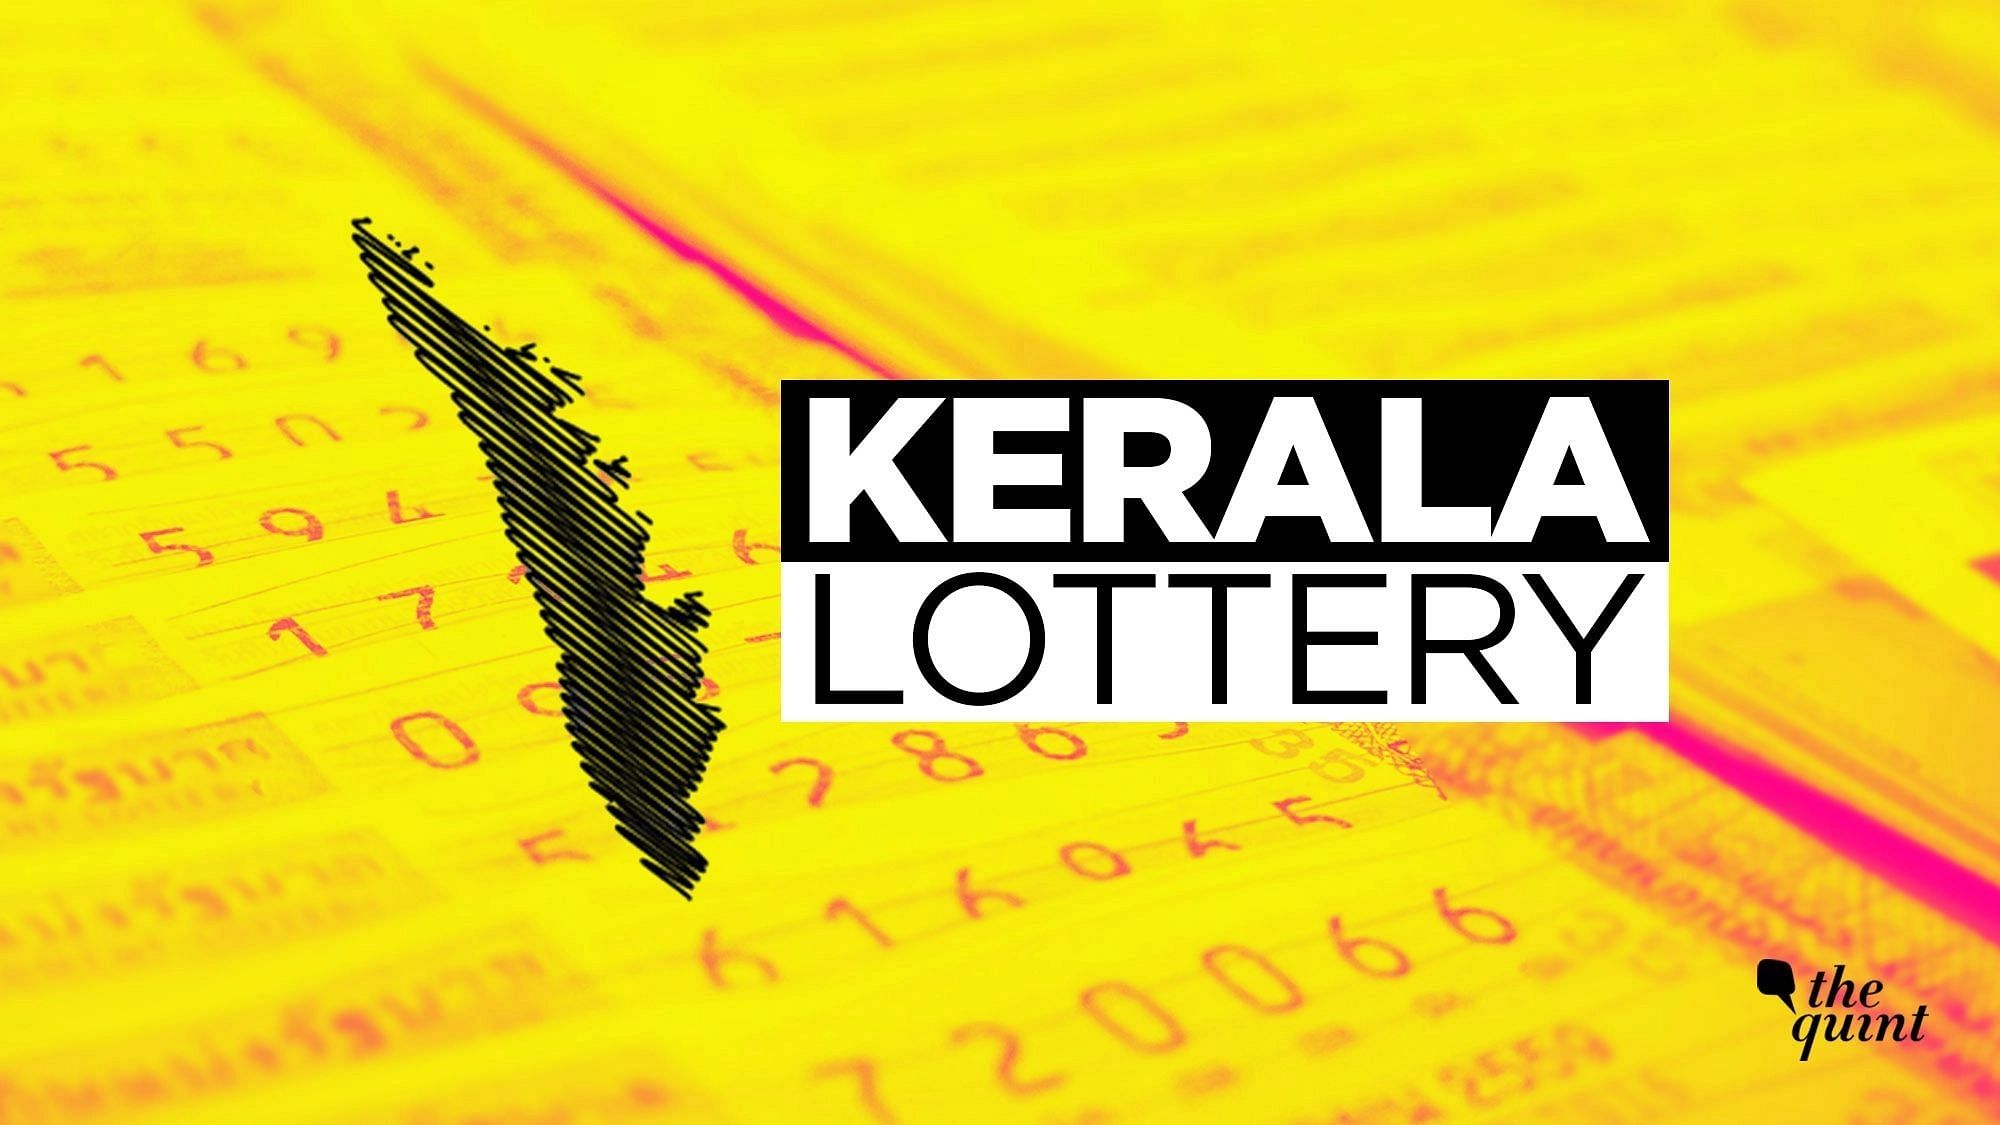 <div class="paragraphs"><p>Here's the Kerala lottery result today for&nbsp;WIN-WIN(W-694) on Monday, 21 November 2022.</p></div>